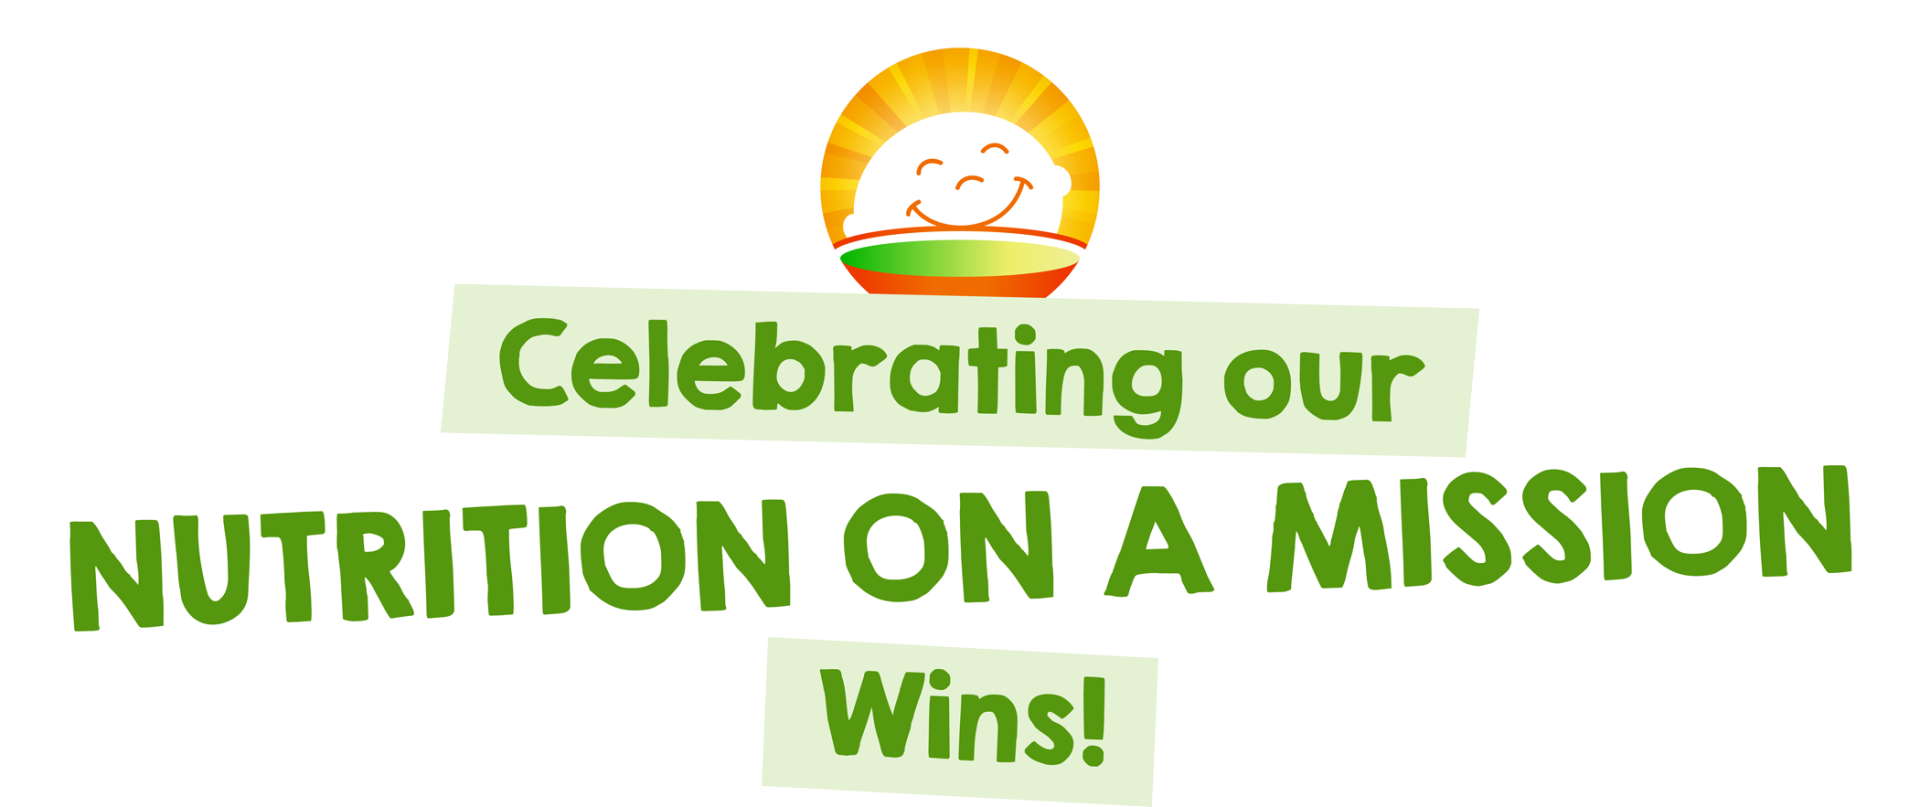 Celebrating our Nutrition on a Mission wins!